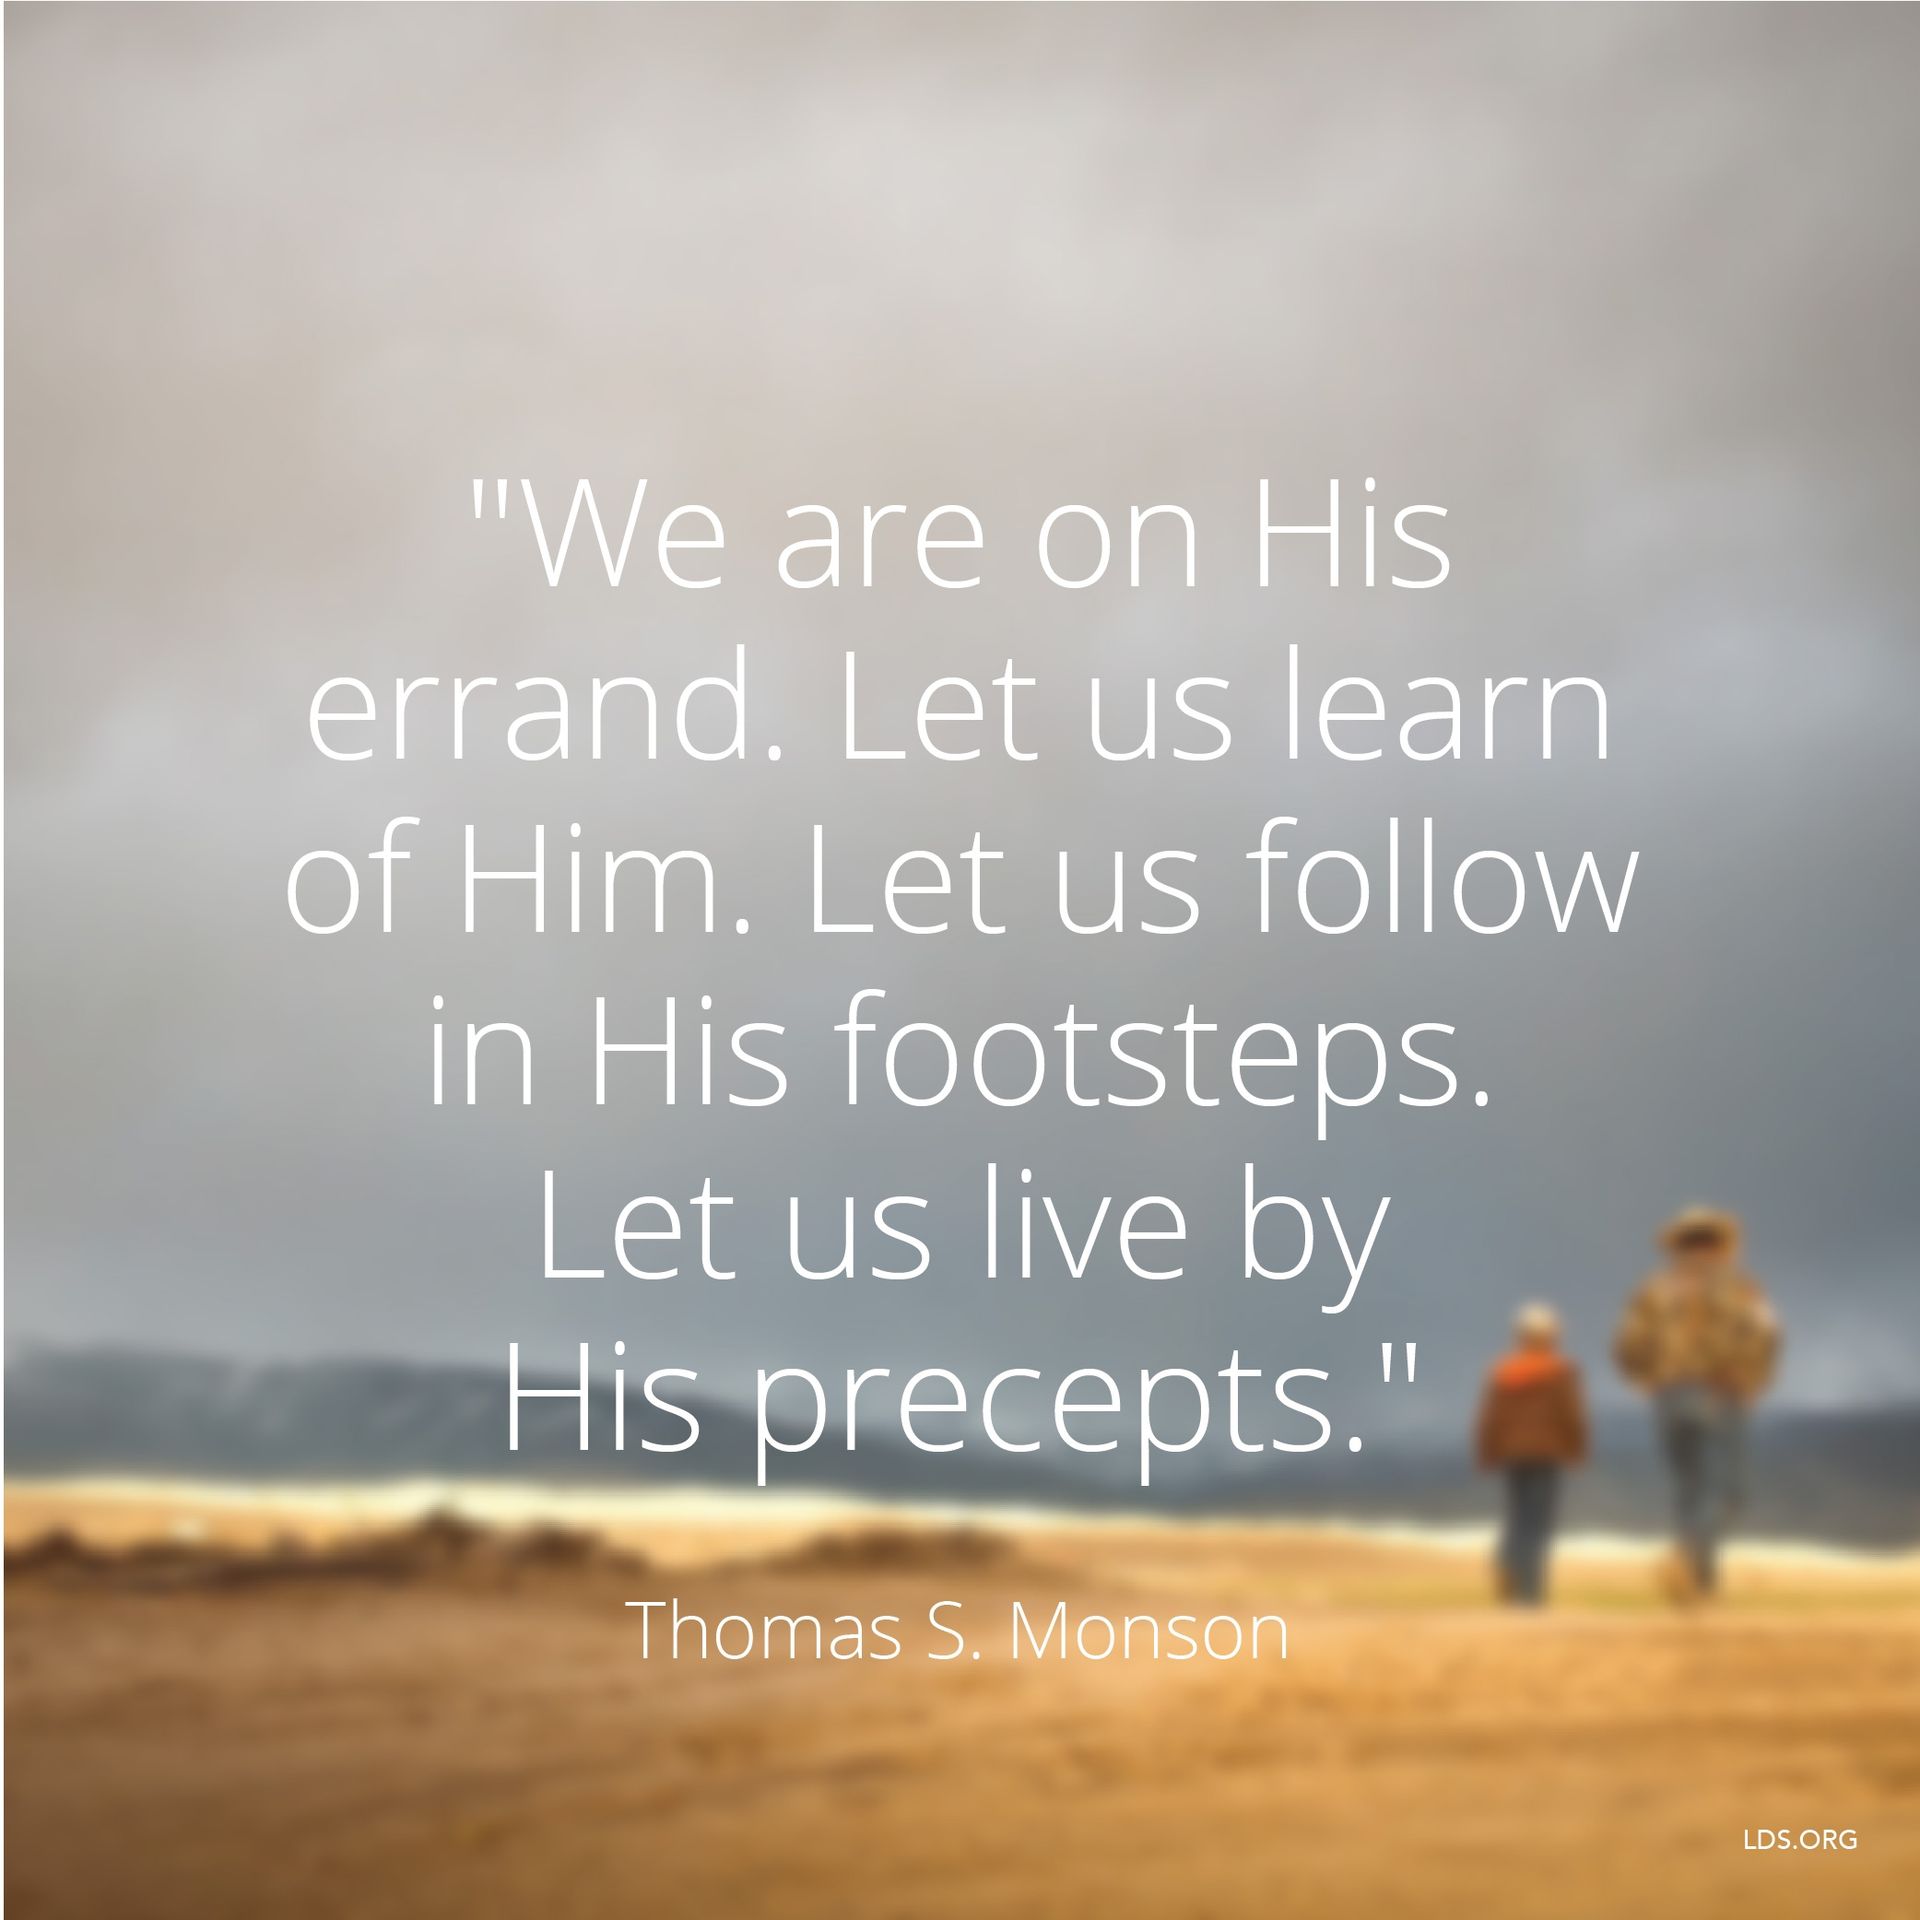 “We are on His errand. Let us learn of Him. Let us follow in His footsteps. Let us live by His precepts.”—President Thomas S. Monson, “The Priesthood—a Sacred Gift” © undefined ipCode 1.